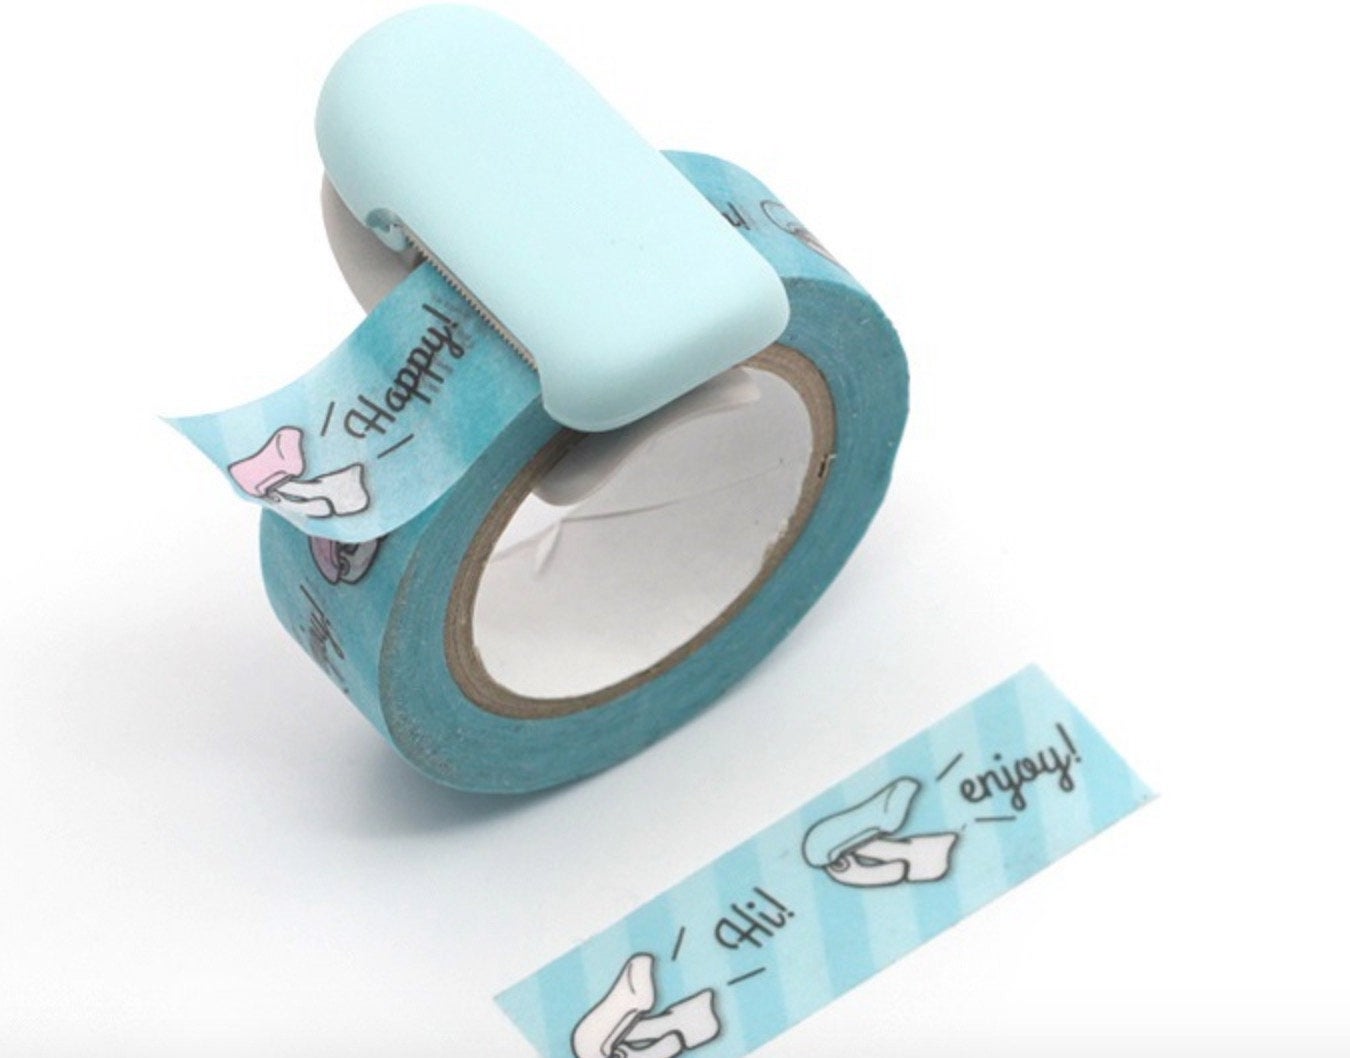 A blue washi cutter clamps on a blue washi tape cutter themed washi tape